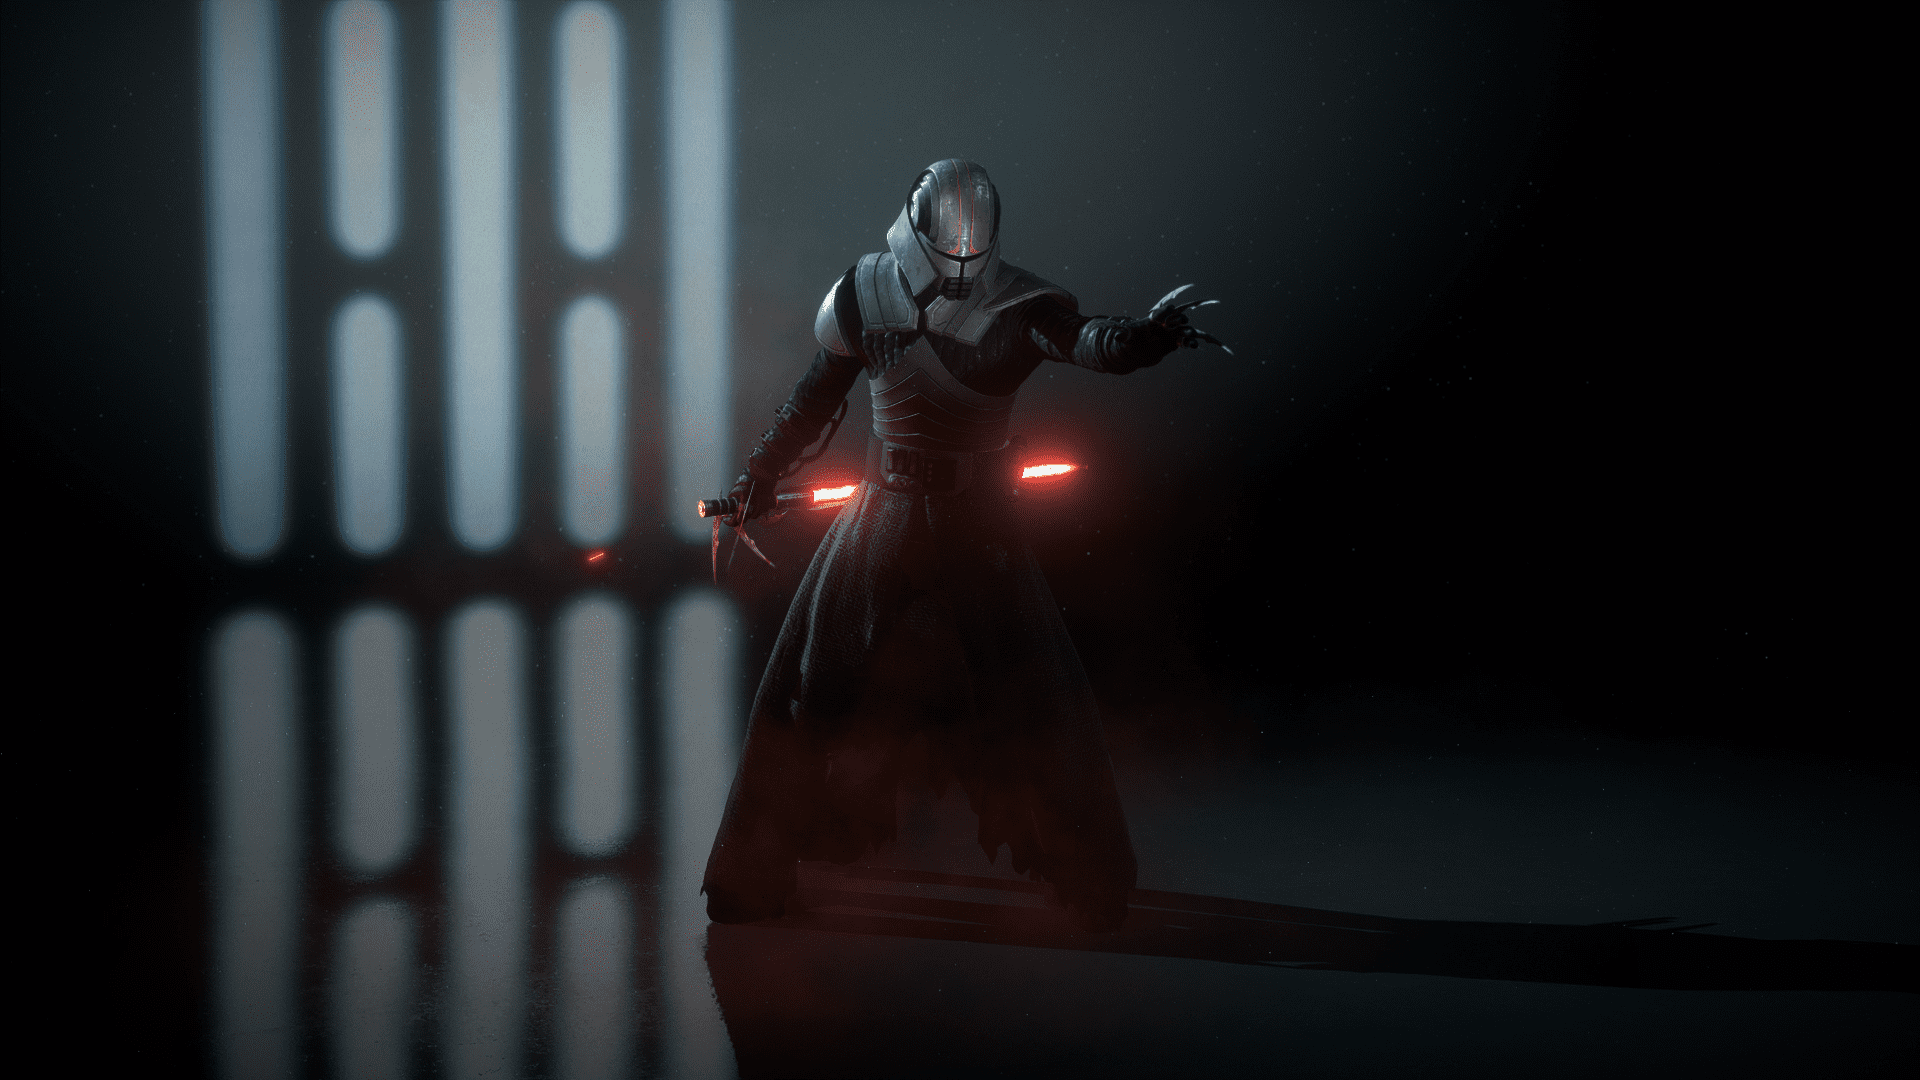 This Starkiller Mod for Battlefront 2 lets you play as Galen Marek from the...